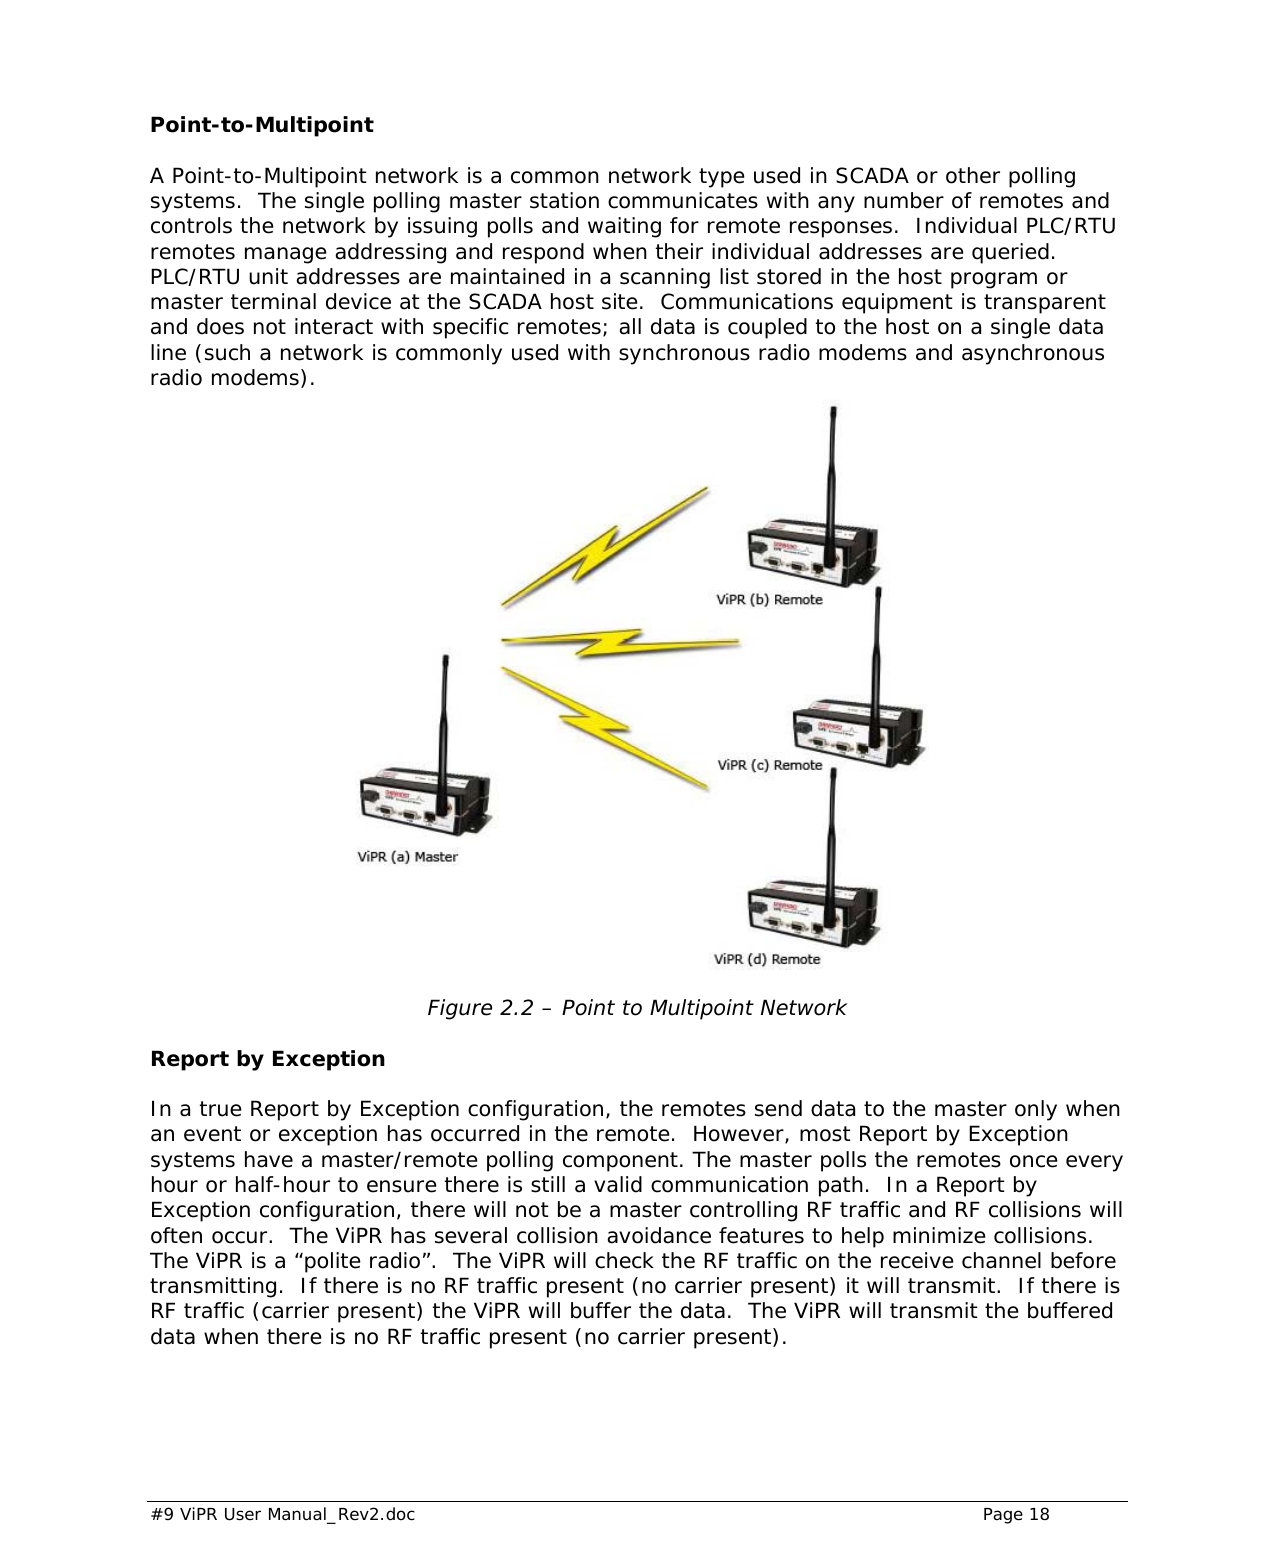  #9 ViPR User Manual_Rev2.doc    Page 18  Point-to-Multipoint A Point-to-Multipoint network is a common network type used in SCADA or other polling systems.  The single polling master station communicates with any number of remotes and controls the network by issuing polls and waiting for remote responses.  Individual PLC/RTU remotes manage addressing and respond when their individual addresses are queried. PLC/RTU unit addresses are maintained in a scanning list stored in the host program or master terminal device at the SCADA host site.  Communications equipment is transparent and does not interact with specific remotes; all data is coupled to the host on a single data line (such a network is commonly used with synchronous radio modems and asynchronous radio modems).   Figure 2.2 – Point to Multipoint Network  Report by Exception In a true Report by Exception configuration, the remotes send data to the master only when an event or exception has occurred in the remote.  However, most Report by Exception systems have a master/remote polling component. The master polls the remotes once every hour or half-hour to ensure there is still a valid communication path.  In a Report by Exception configuration, there will not be a master controlling RF traffic and RF collisions will often occur.  The ViPR has several collision avoidance features to help minimize collisions.  The ViPR is a “polite radio”.  The ViPR will check the RF traffic on the receive channel before transmitting.  If there is no RF traffic present (no carrier present) it will transmit.  If there is RF traffic (carrier present) the ViPR will buffer the data.  The ViPR will transmit the buffered data when there is no RF traffic present (no carrier present).   